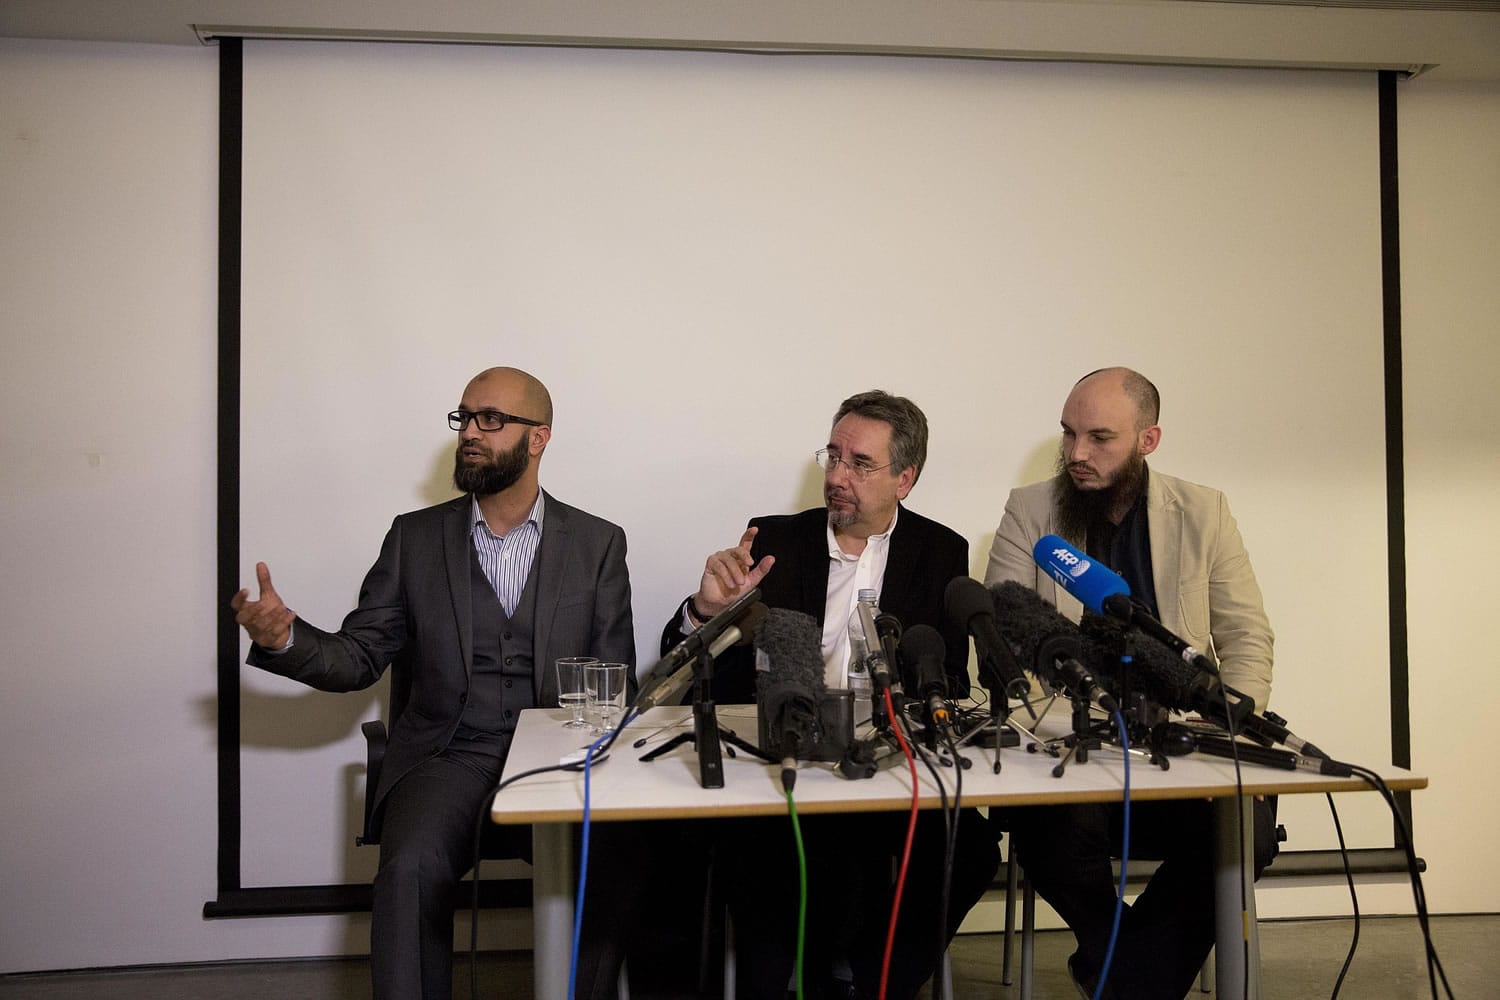 CAGE research director Asim Qureshi, from left, speaks next to political activist John Rees and spokesman Cerie Bullivant during a press conference held by the CAGE human rights charity in London on Thursday.